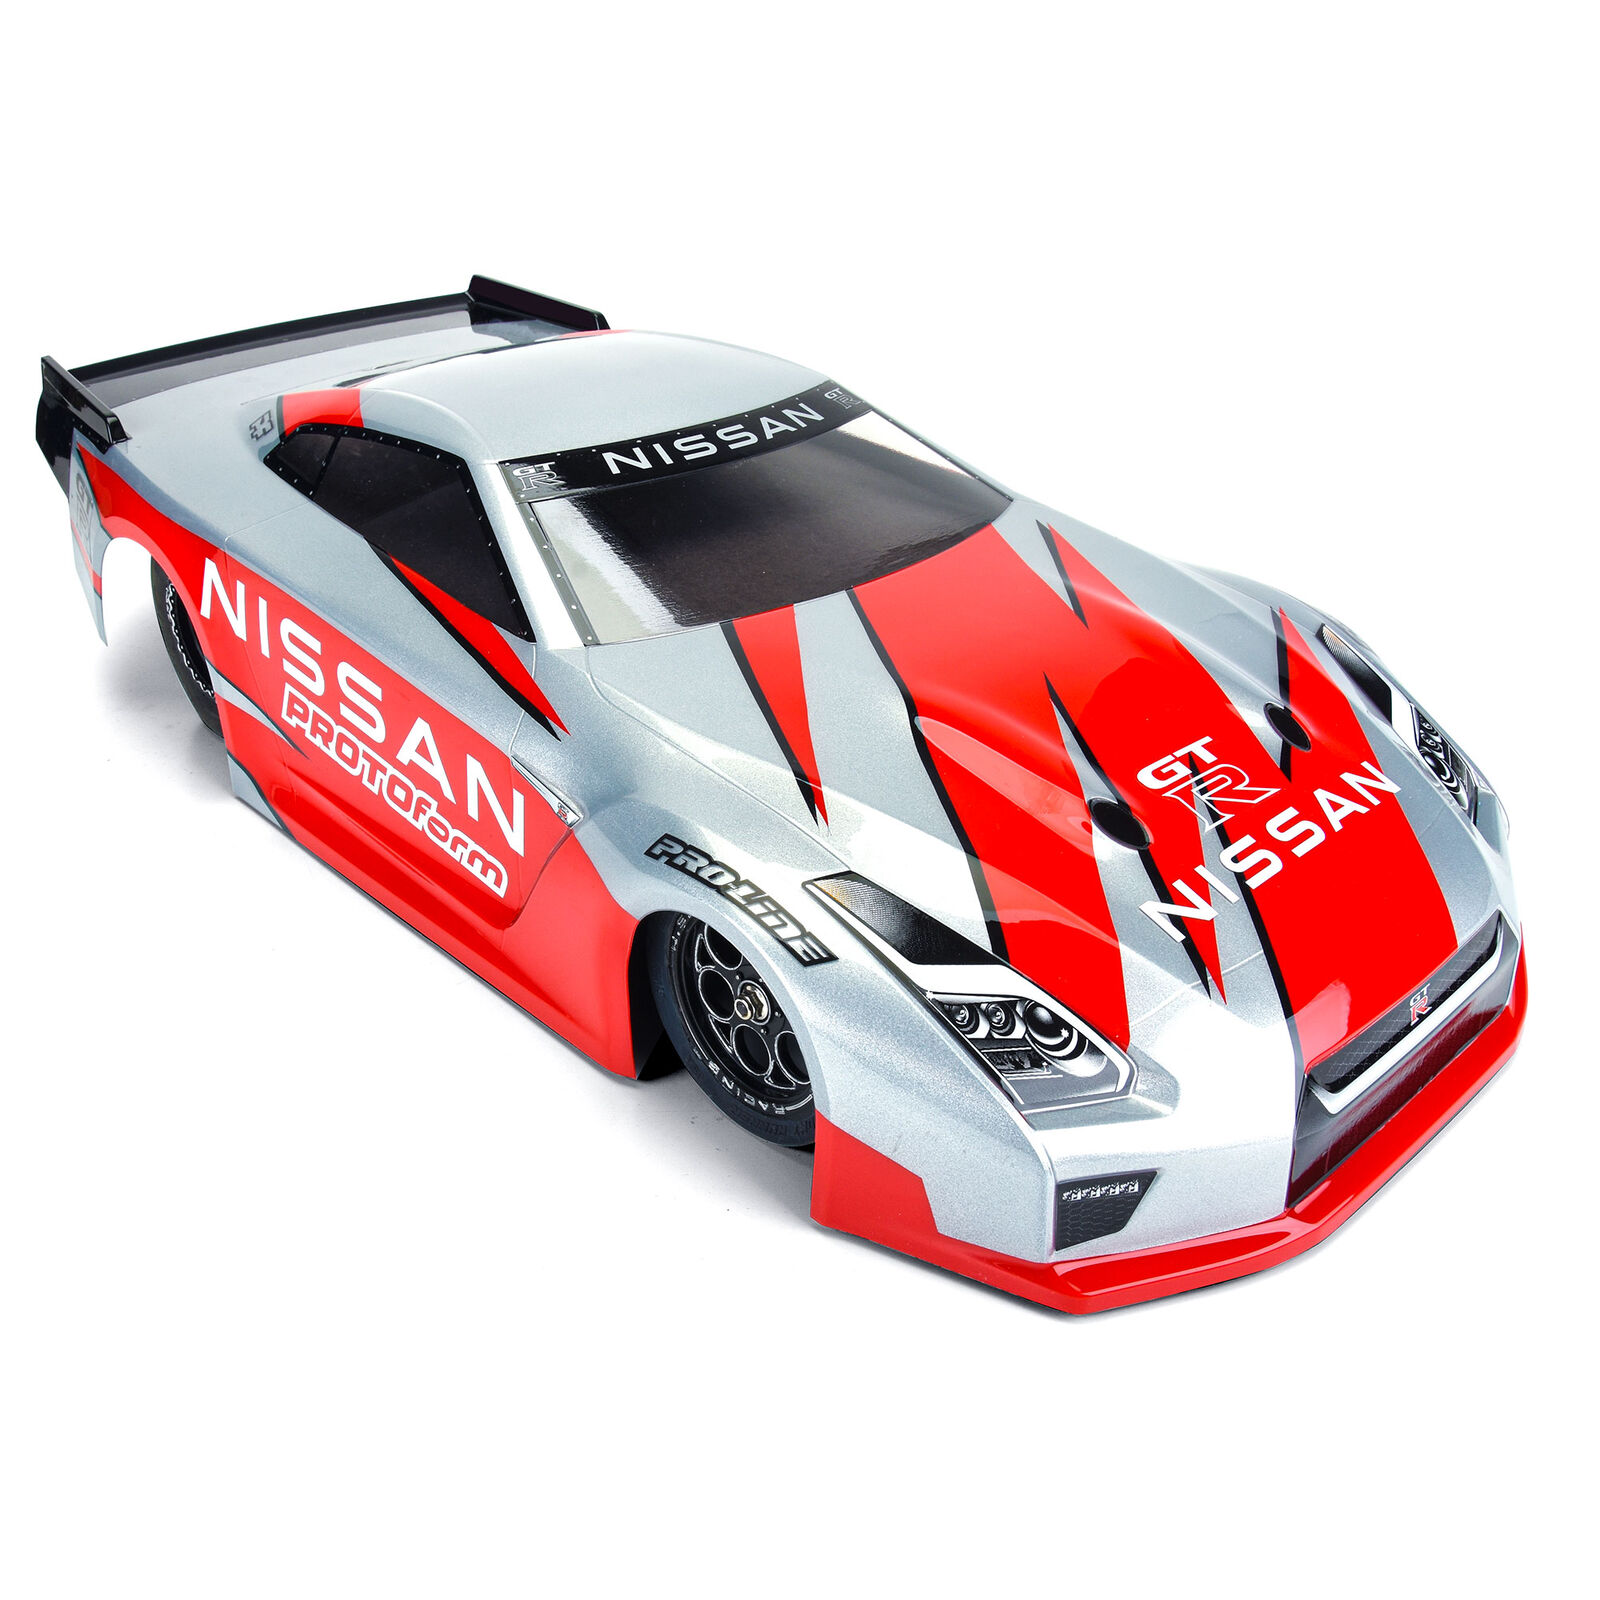 PROTOform - Pro-line Racing 1/10 Nissan GT-R R35 Clear Body: Losi